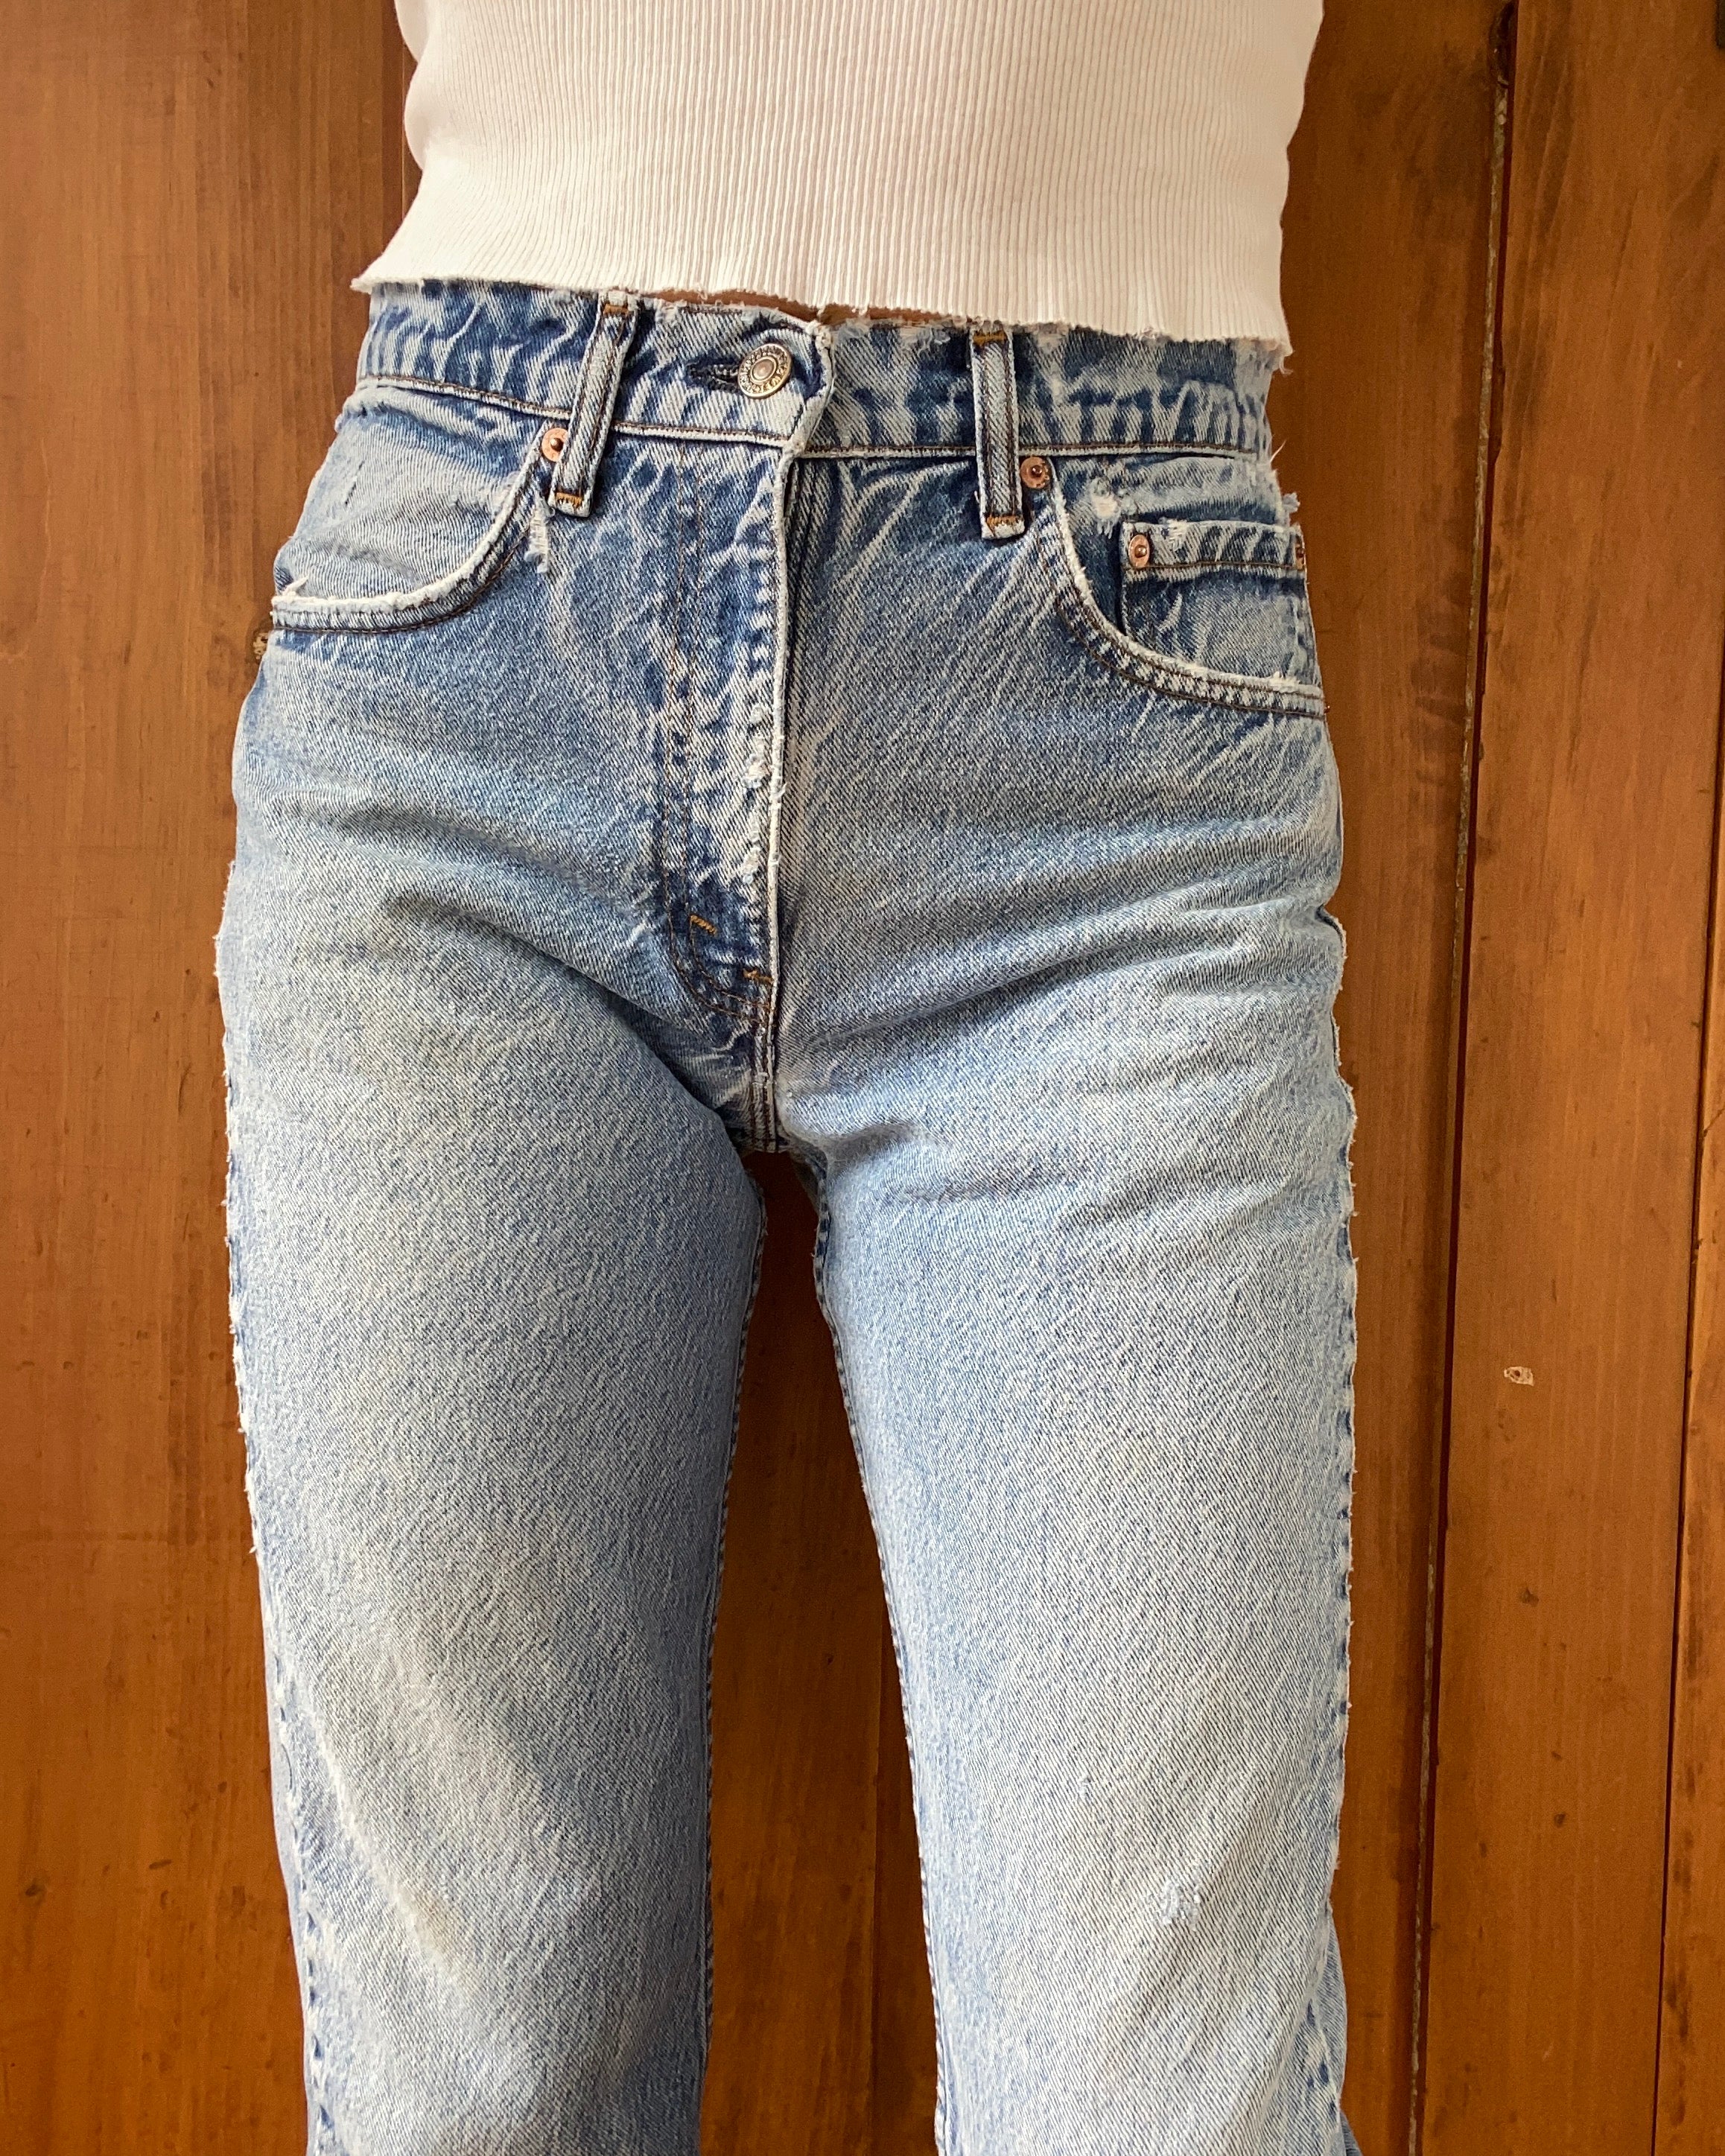 Vintage 1980s Levis Jeans Made in USA size 29 to 30